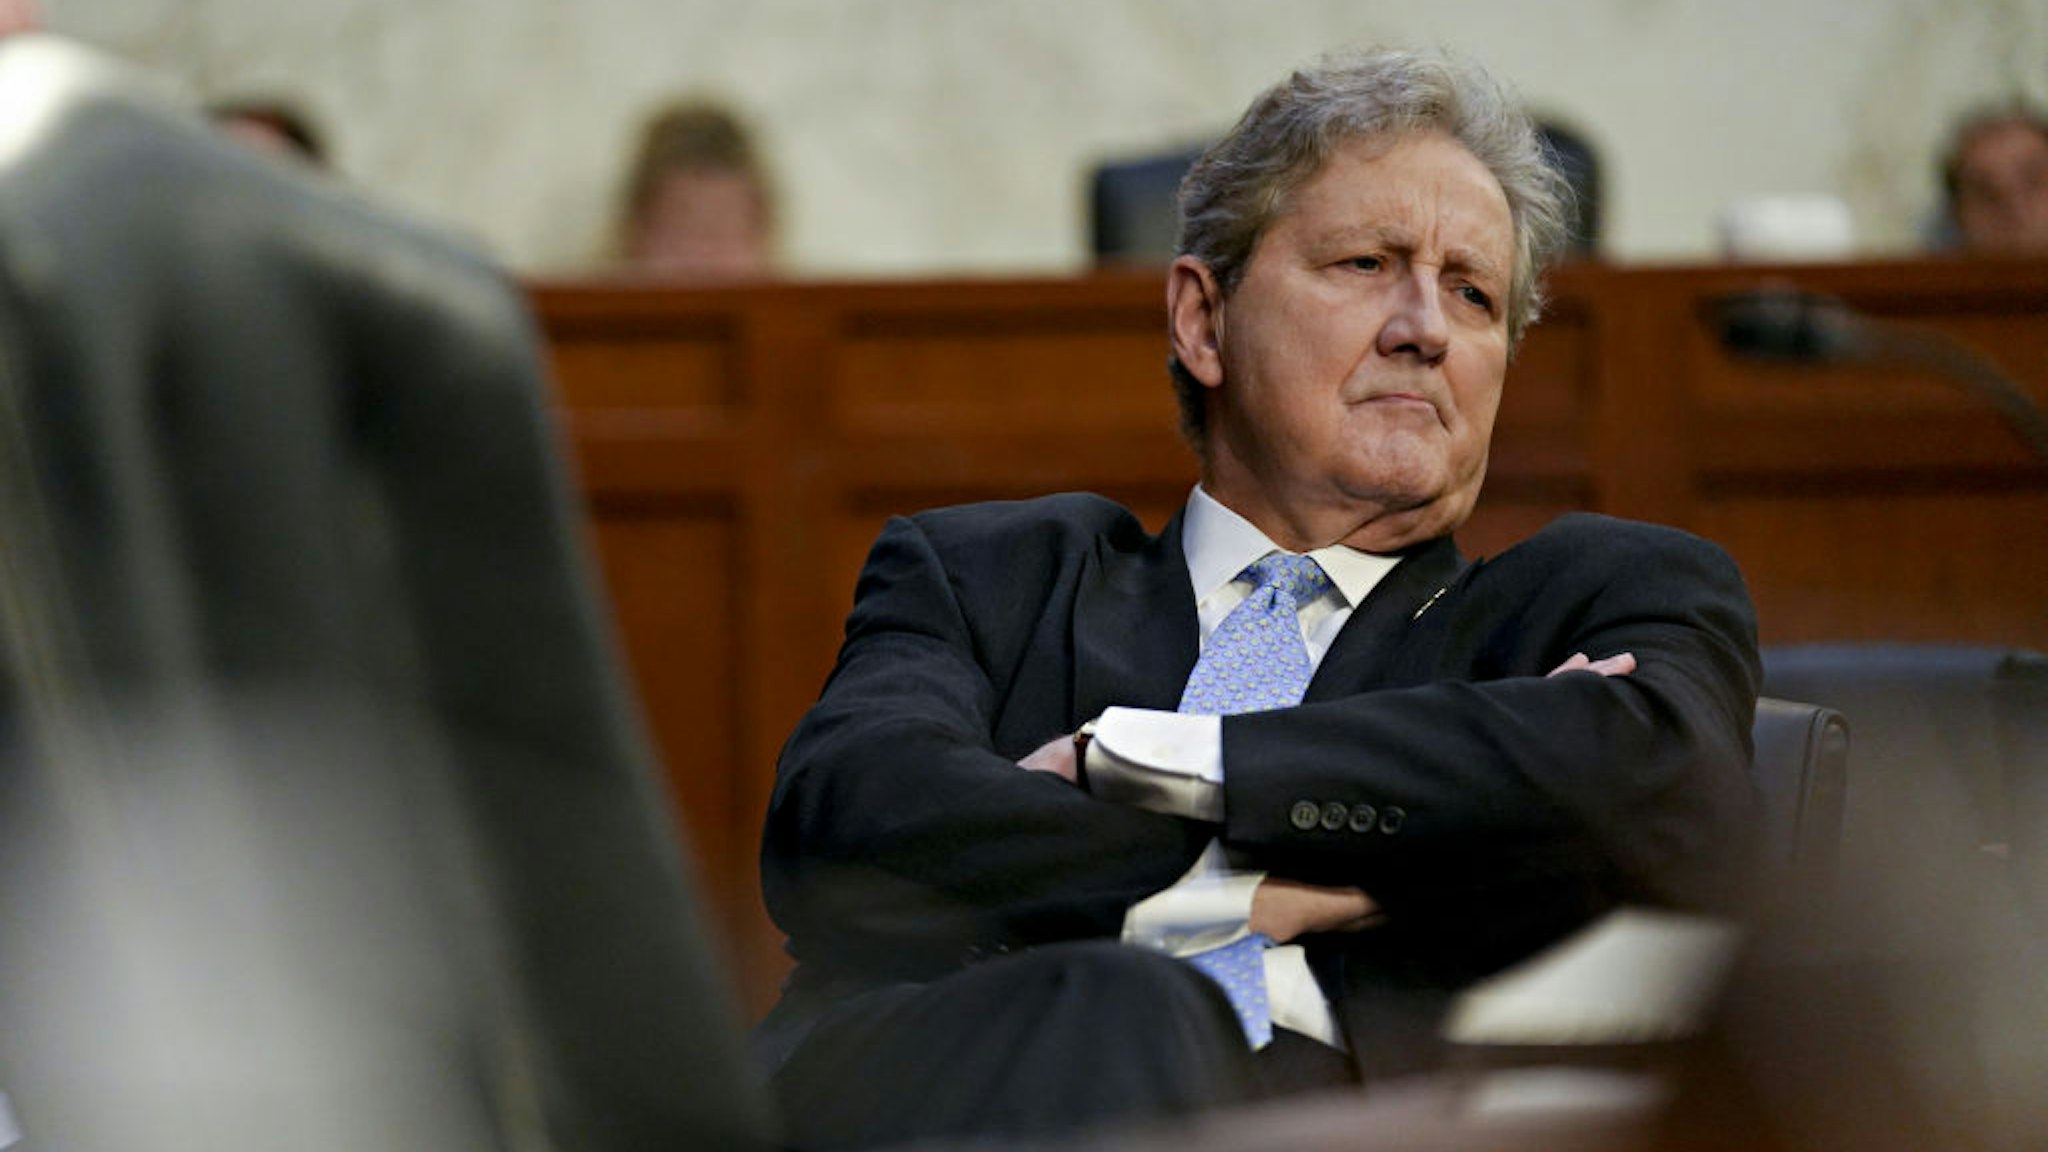 Senator John Kennedy, a Republican from Louisiana, during a Senate Judiciary Committee hearing with Twitter whistleblower Peiter Zatko in Washington, D.C., US, on Tuesday, Sept. 13, 2022. Zatko's first public appearance since his explosive allegations against the social media giant comes as lawmakers and regulators seek to rein in or break up tech companies. Photographer: Eric Lee/Bloomberg via Getty Images